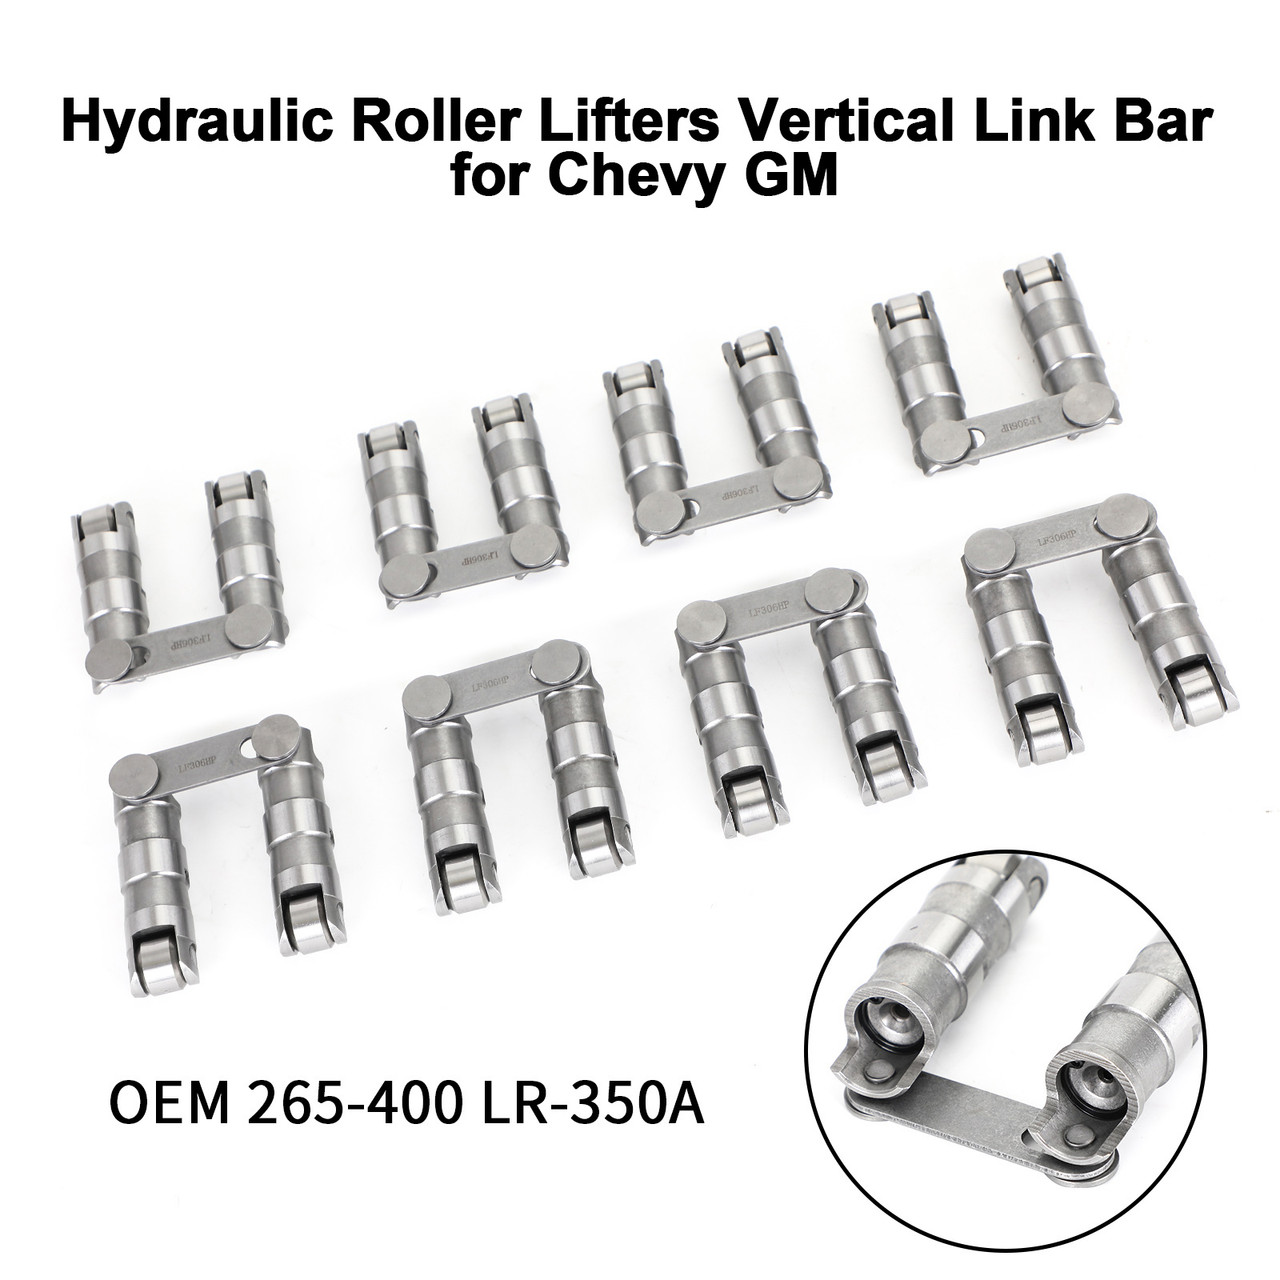 77-85 Chevrolet C10 65-74 Pickup 72-86 Suburban Hydraulic Roller Lifters Vertical Link Bar LR-350A 265-400